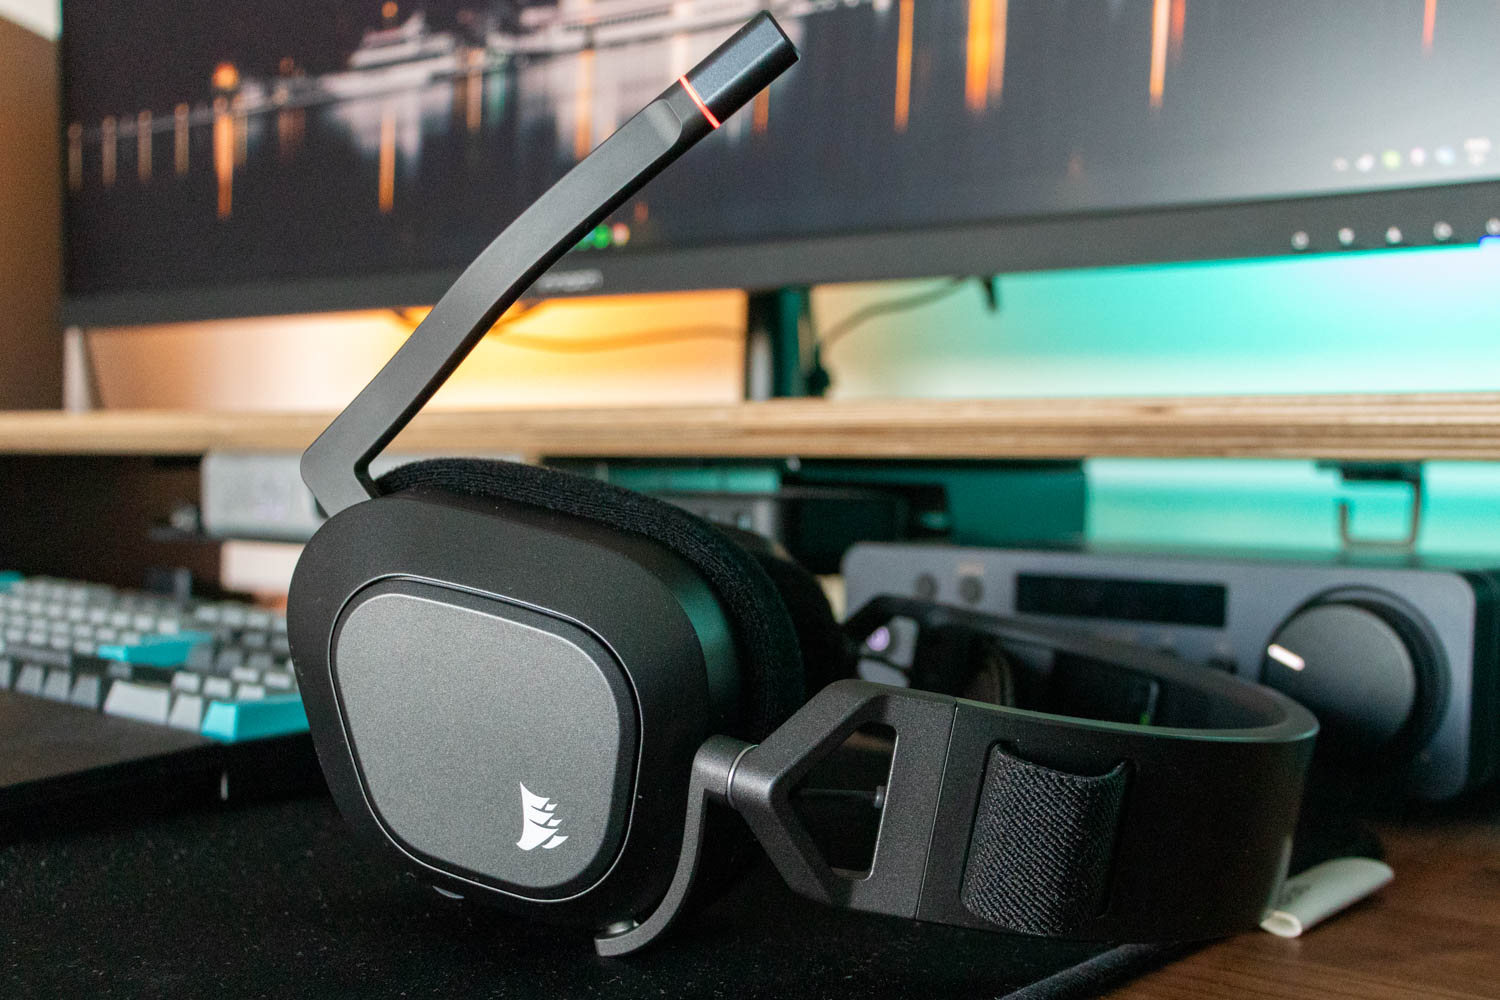 Corsair HS80 MAX Wireless Gaming Headset Review